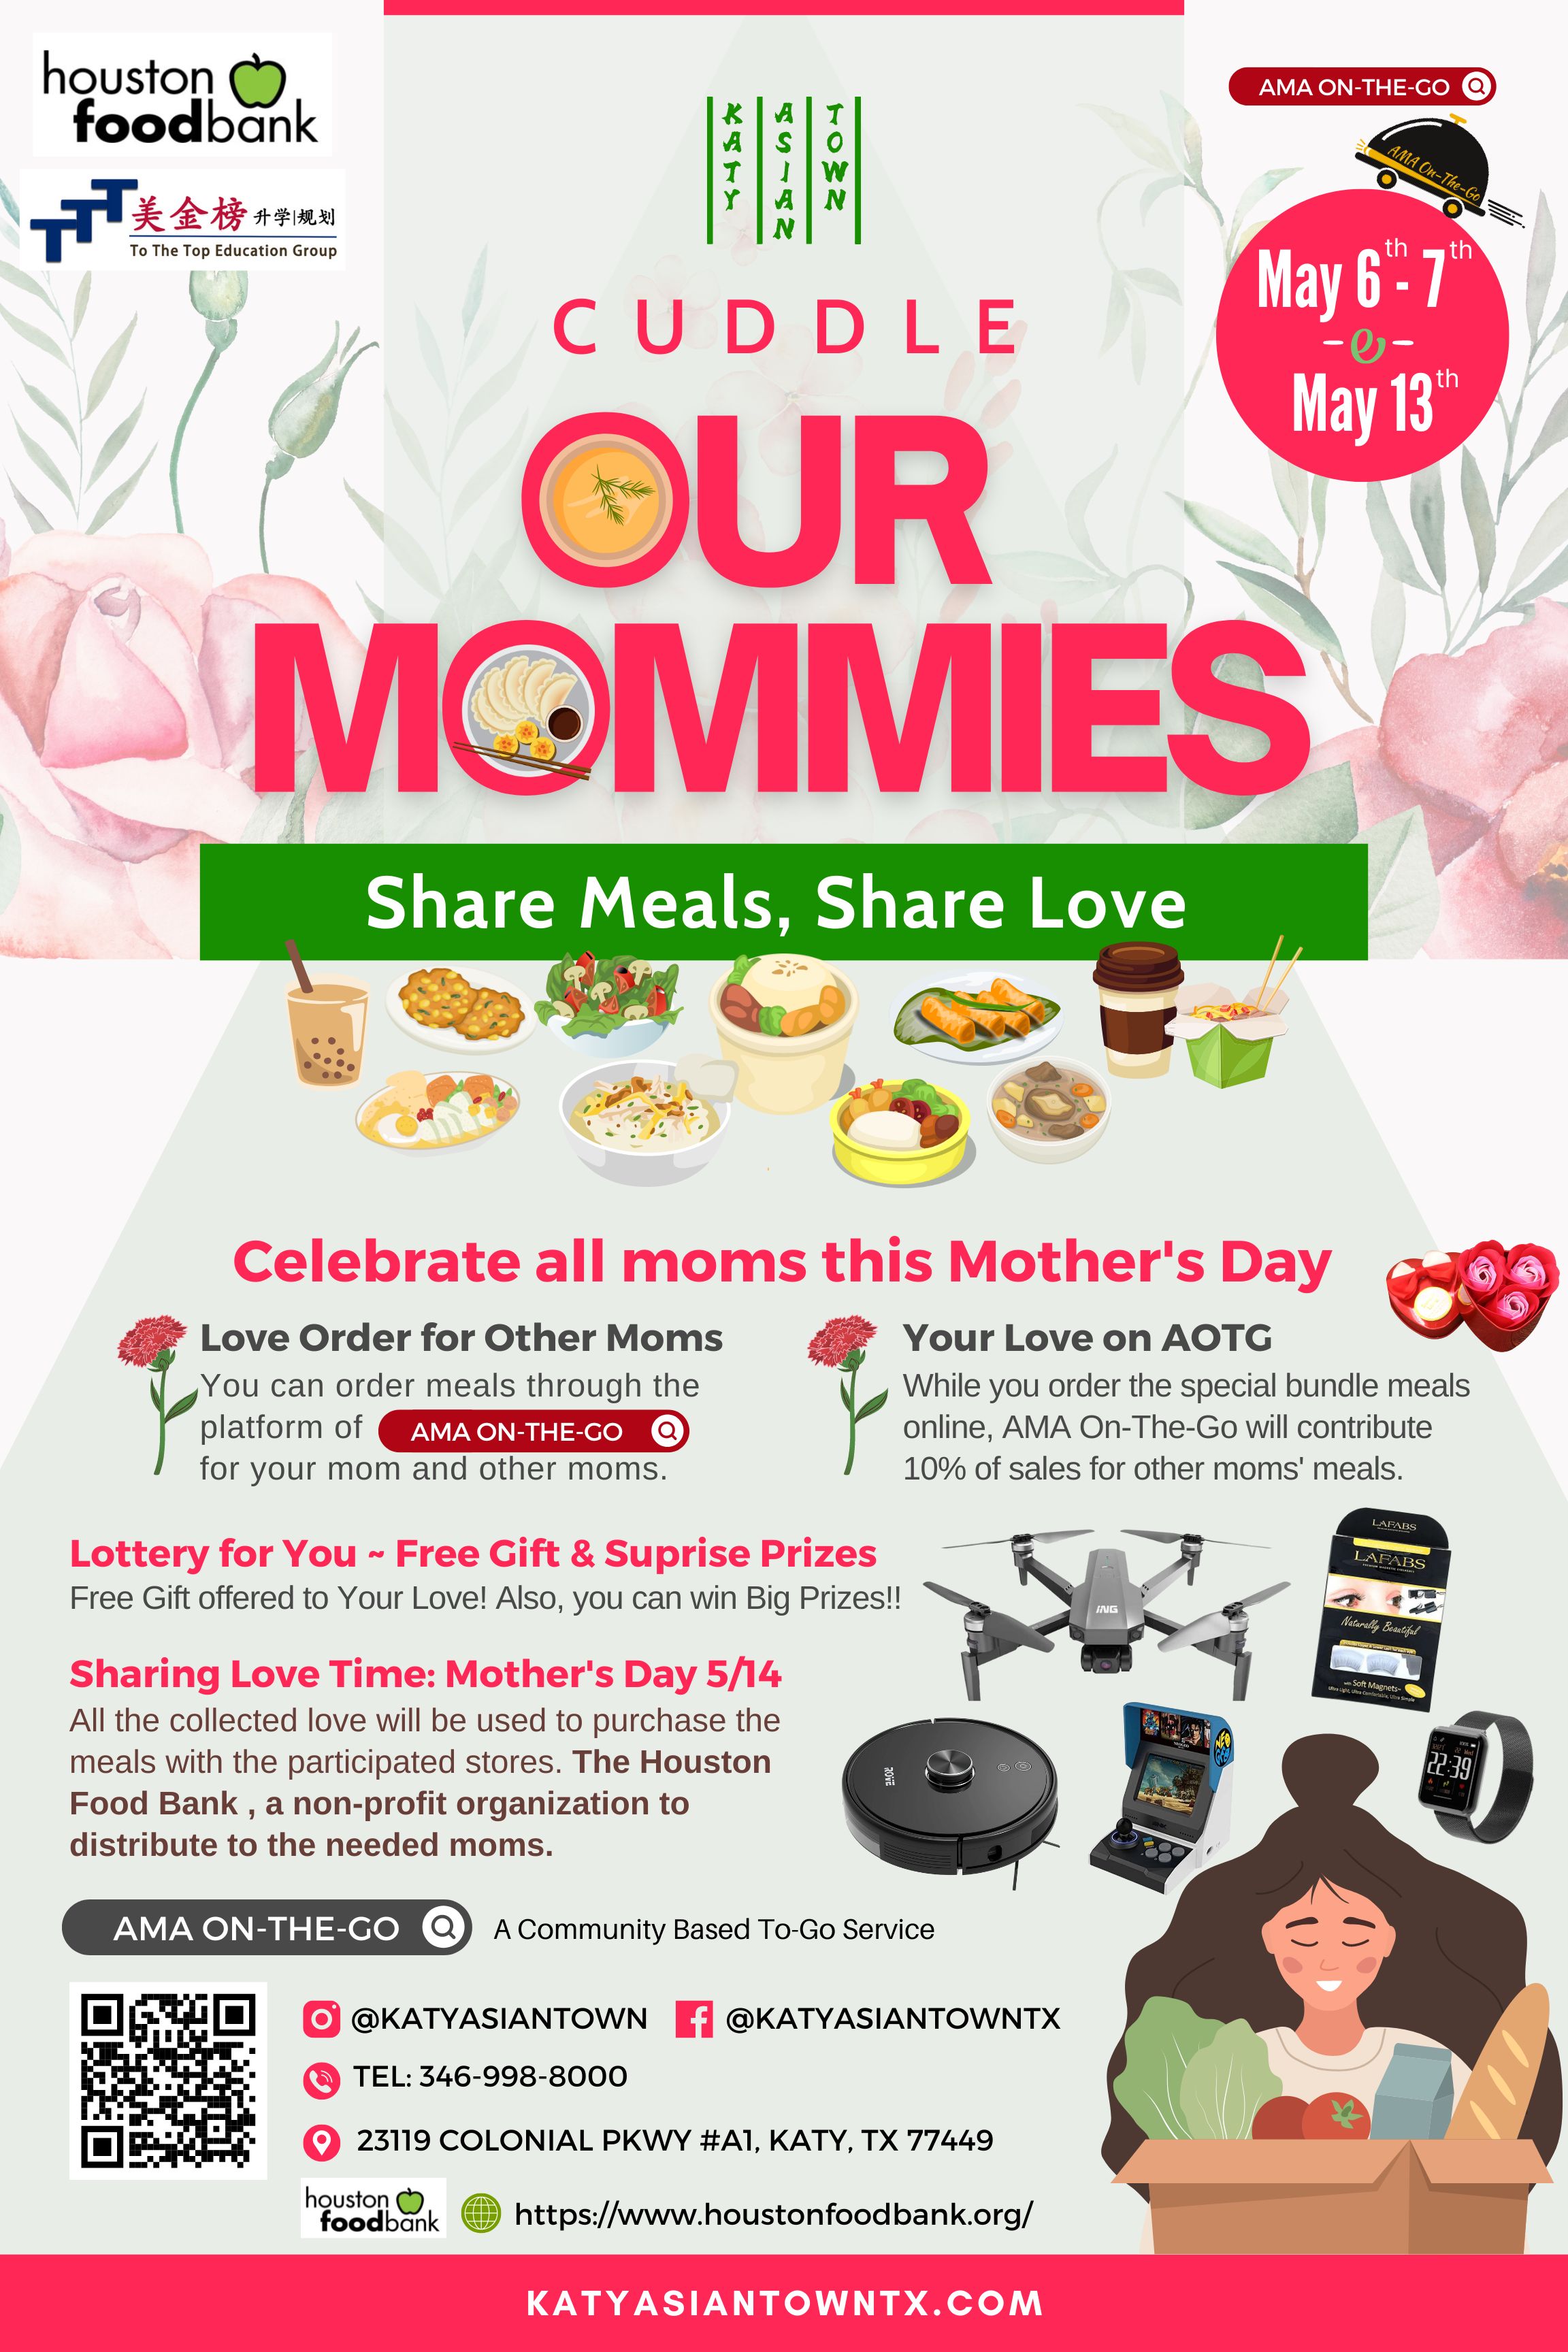 Cuddle Our Mommies: Share Meals, Share Love with Katy Asian Town and Houston Food Bank